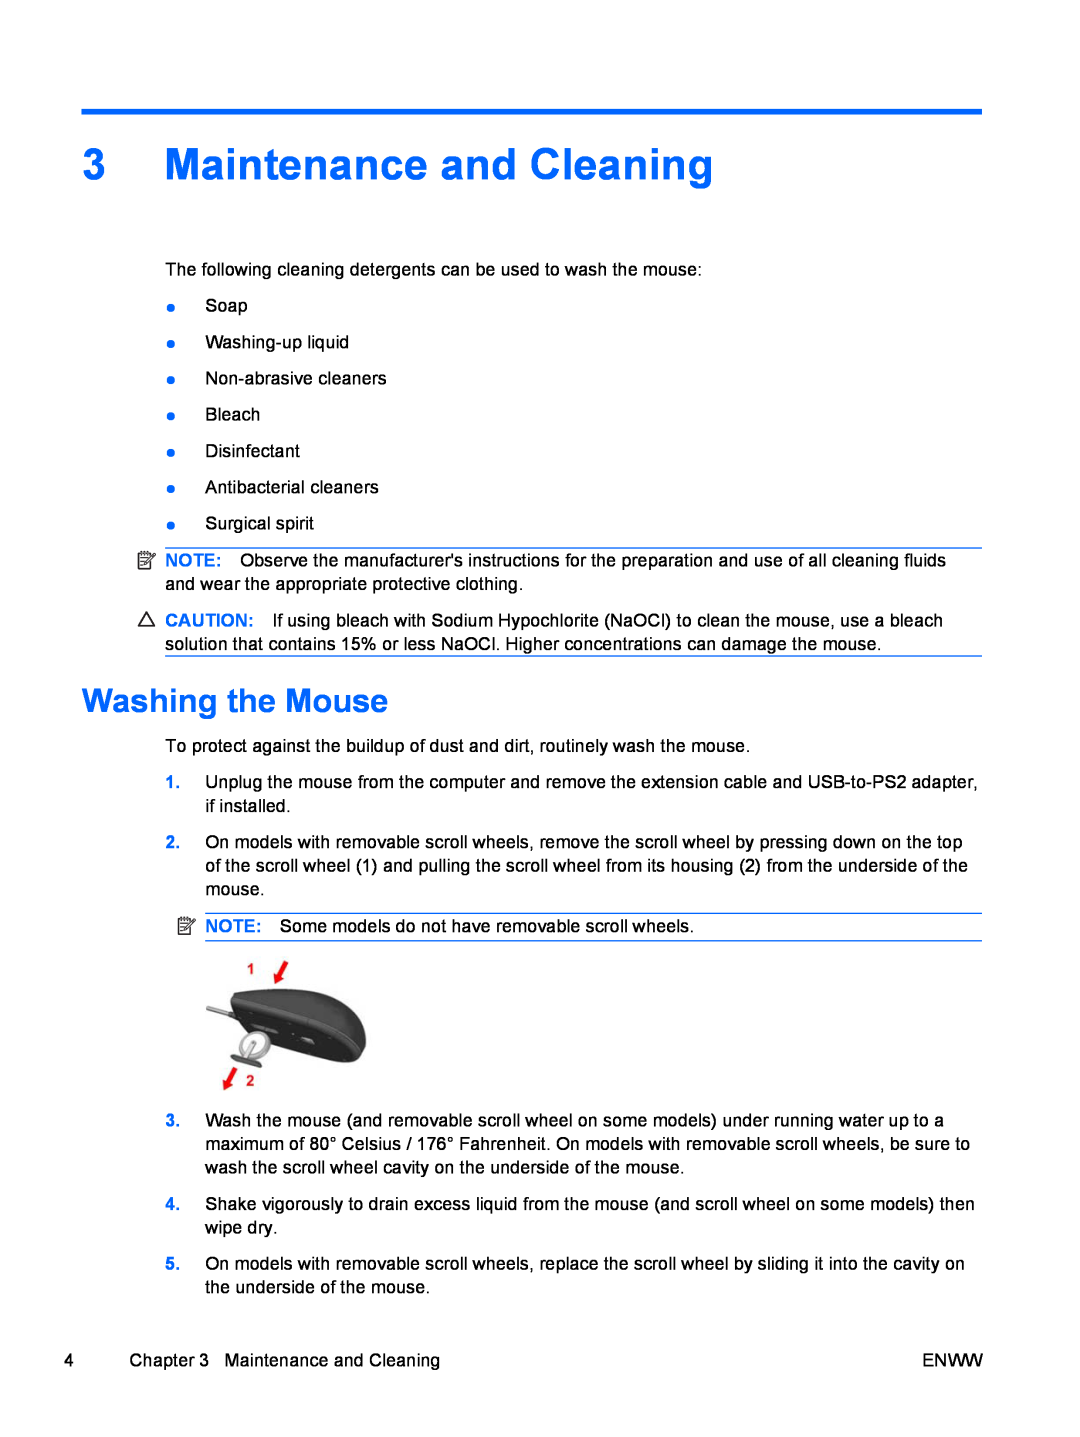 HP 8000 tower manual Maintenance and Cleaning, Washing the Mouse 